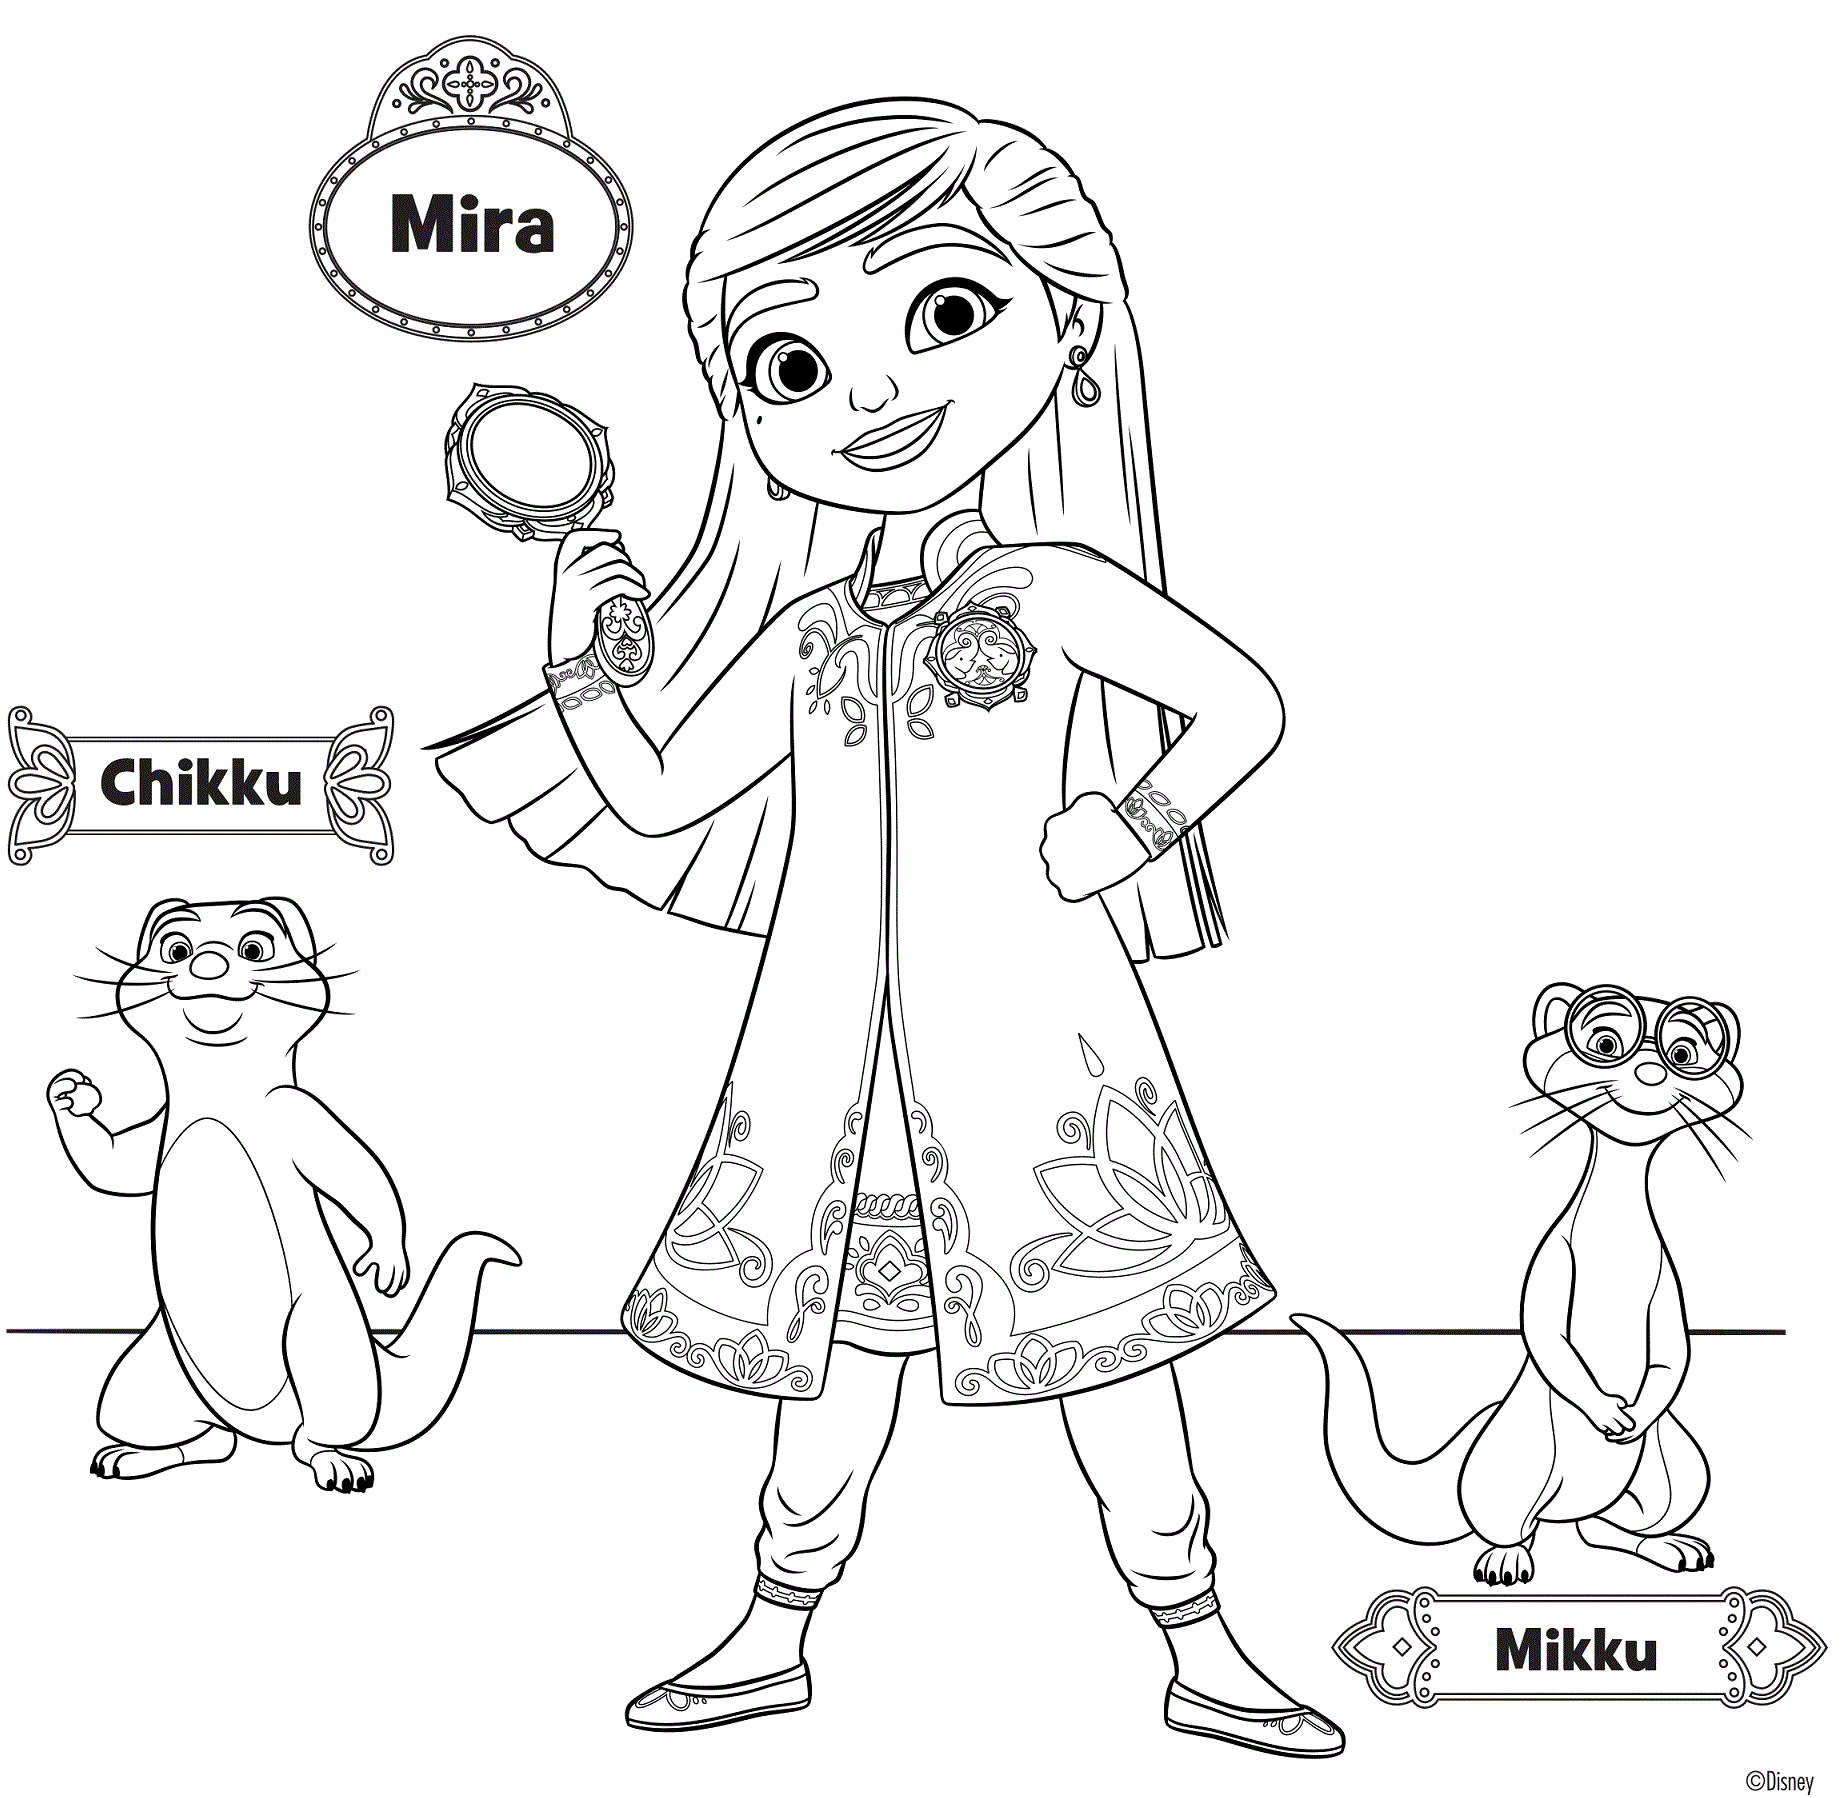 Mira Coloring Pages Pdf For Kids - Mira Coloring Page To Print